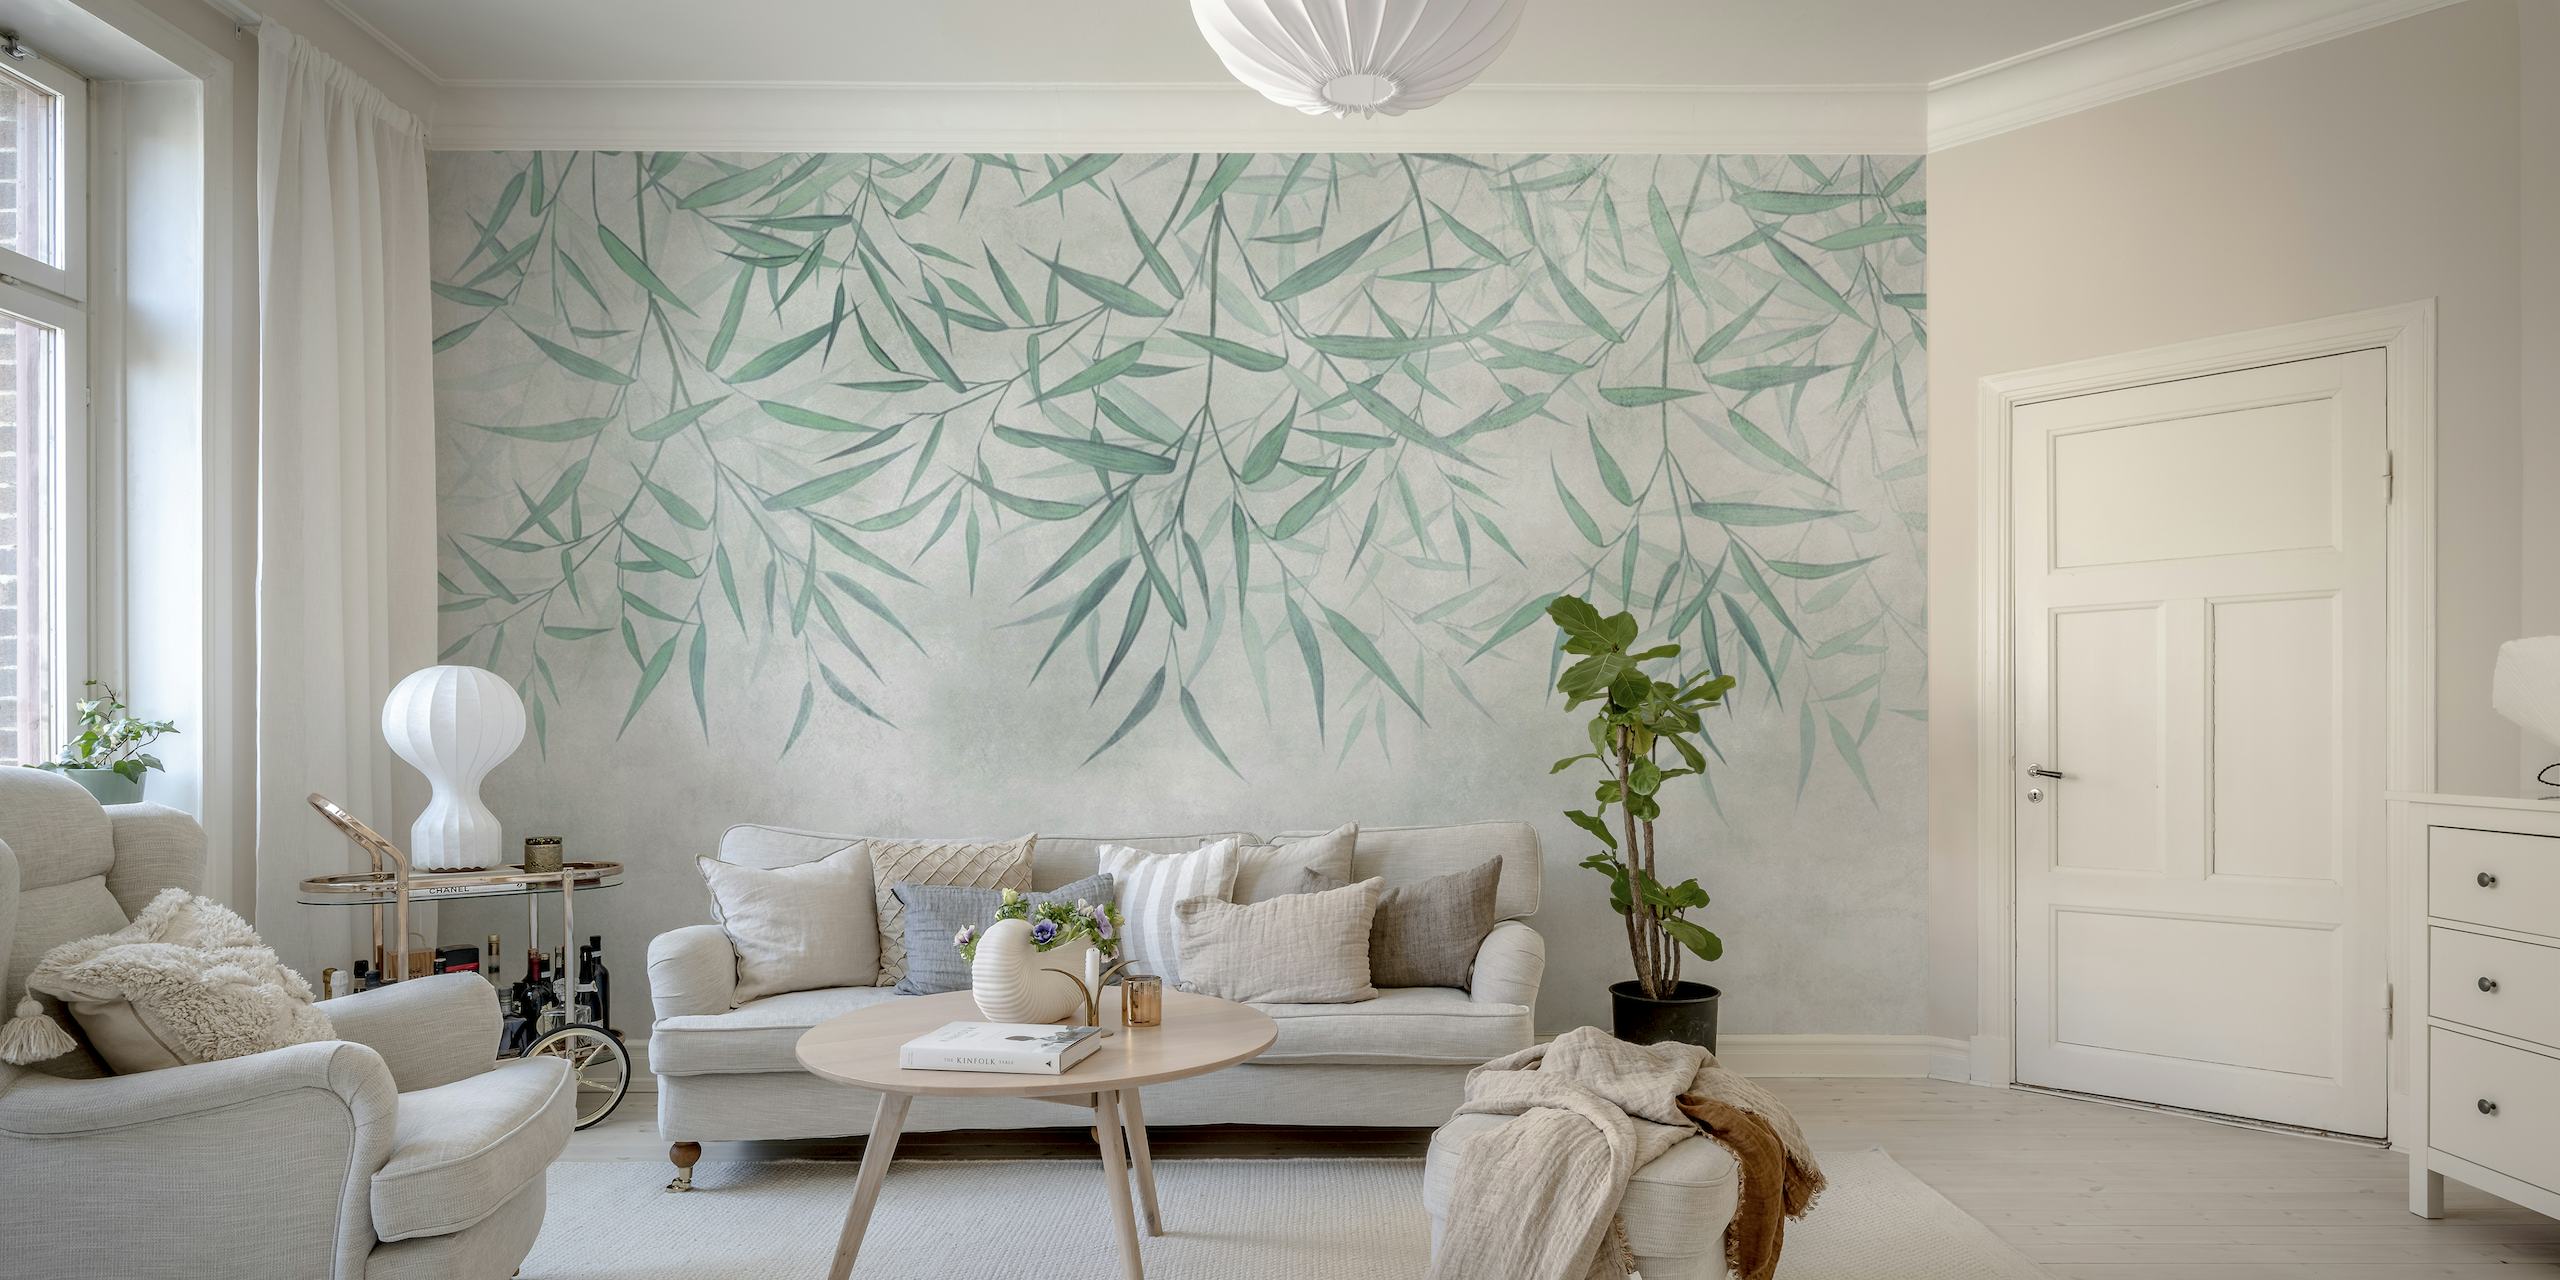 Wall mural of hanging bamboo leaves with a soft textured background, creating a peaceful and natural atmosphere